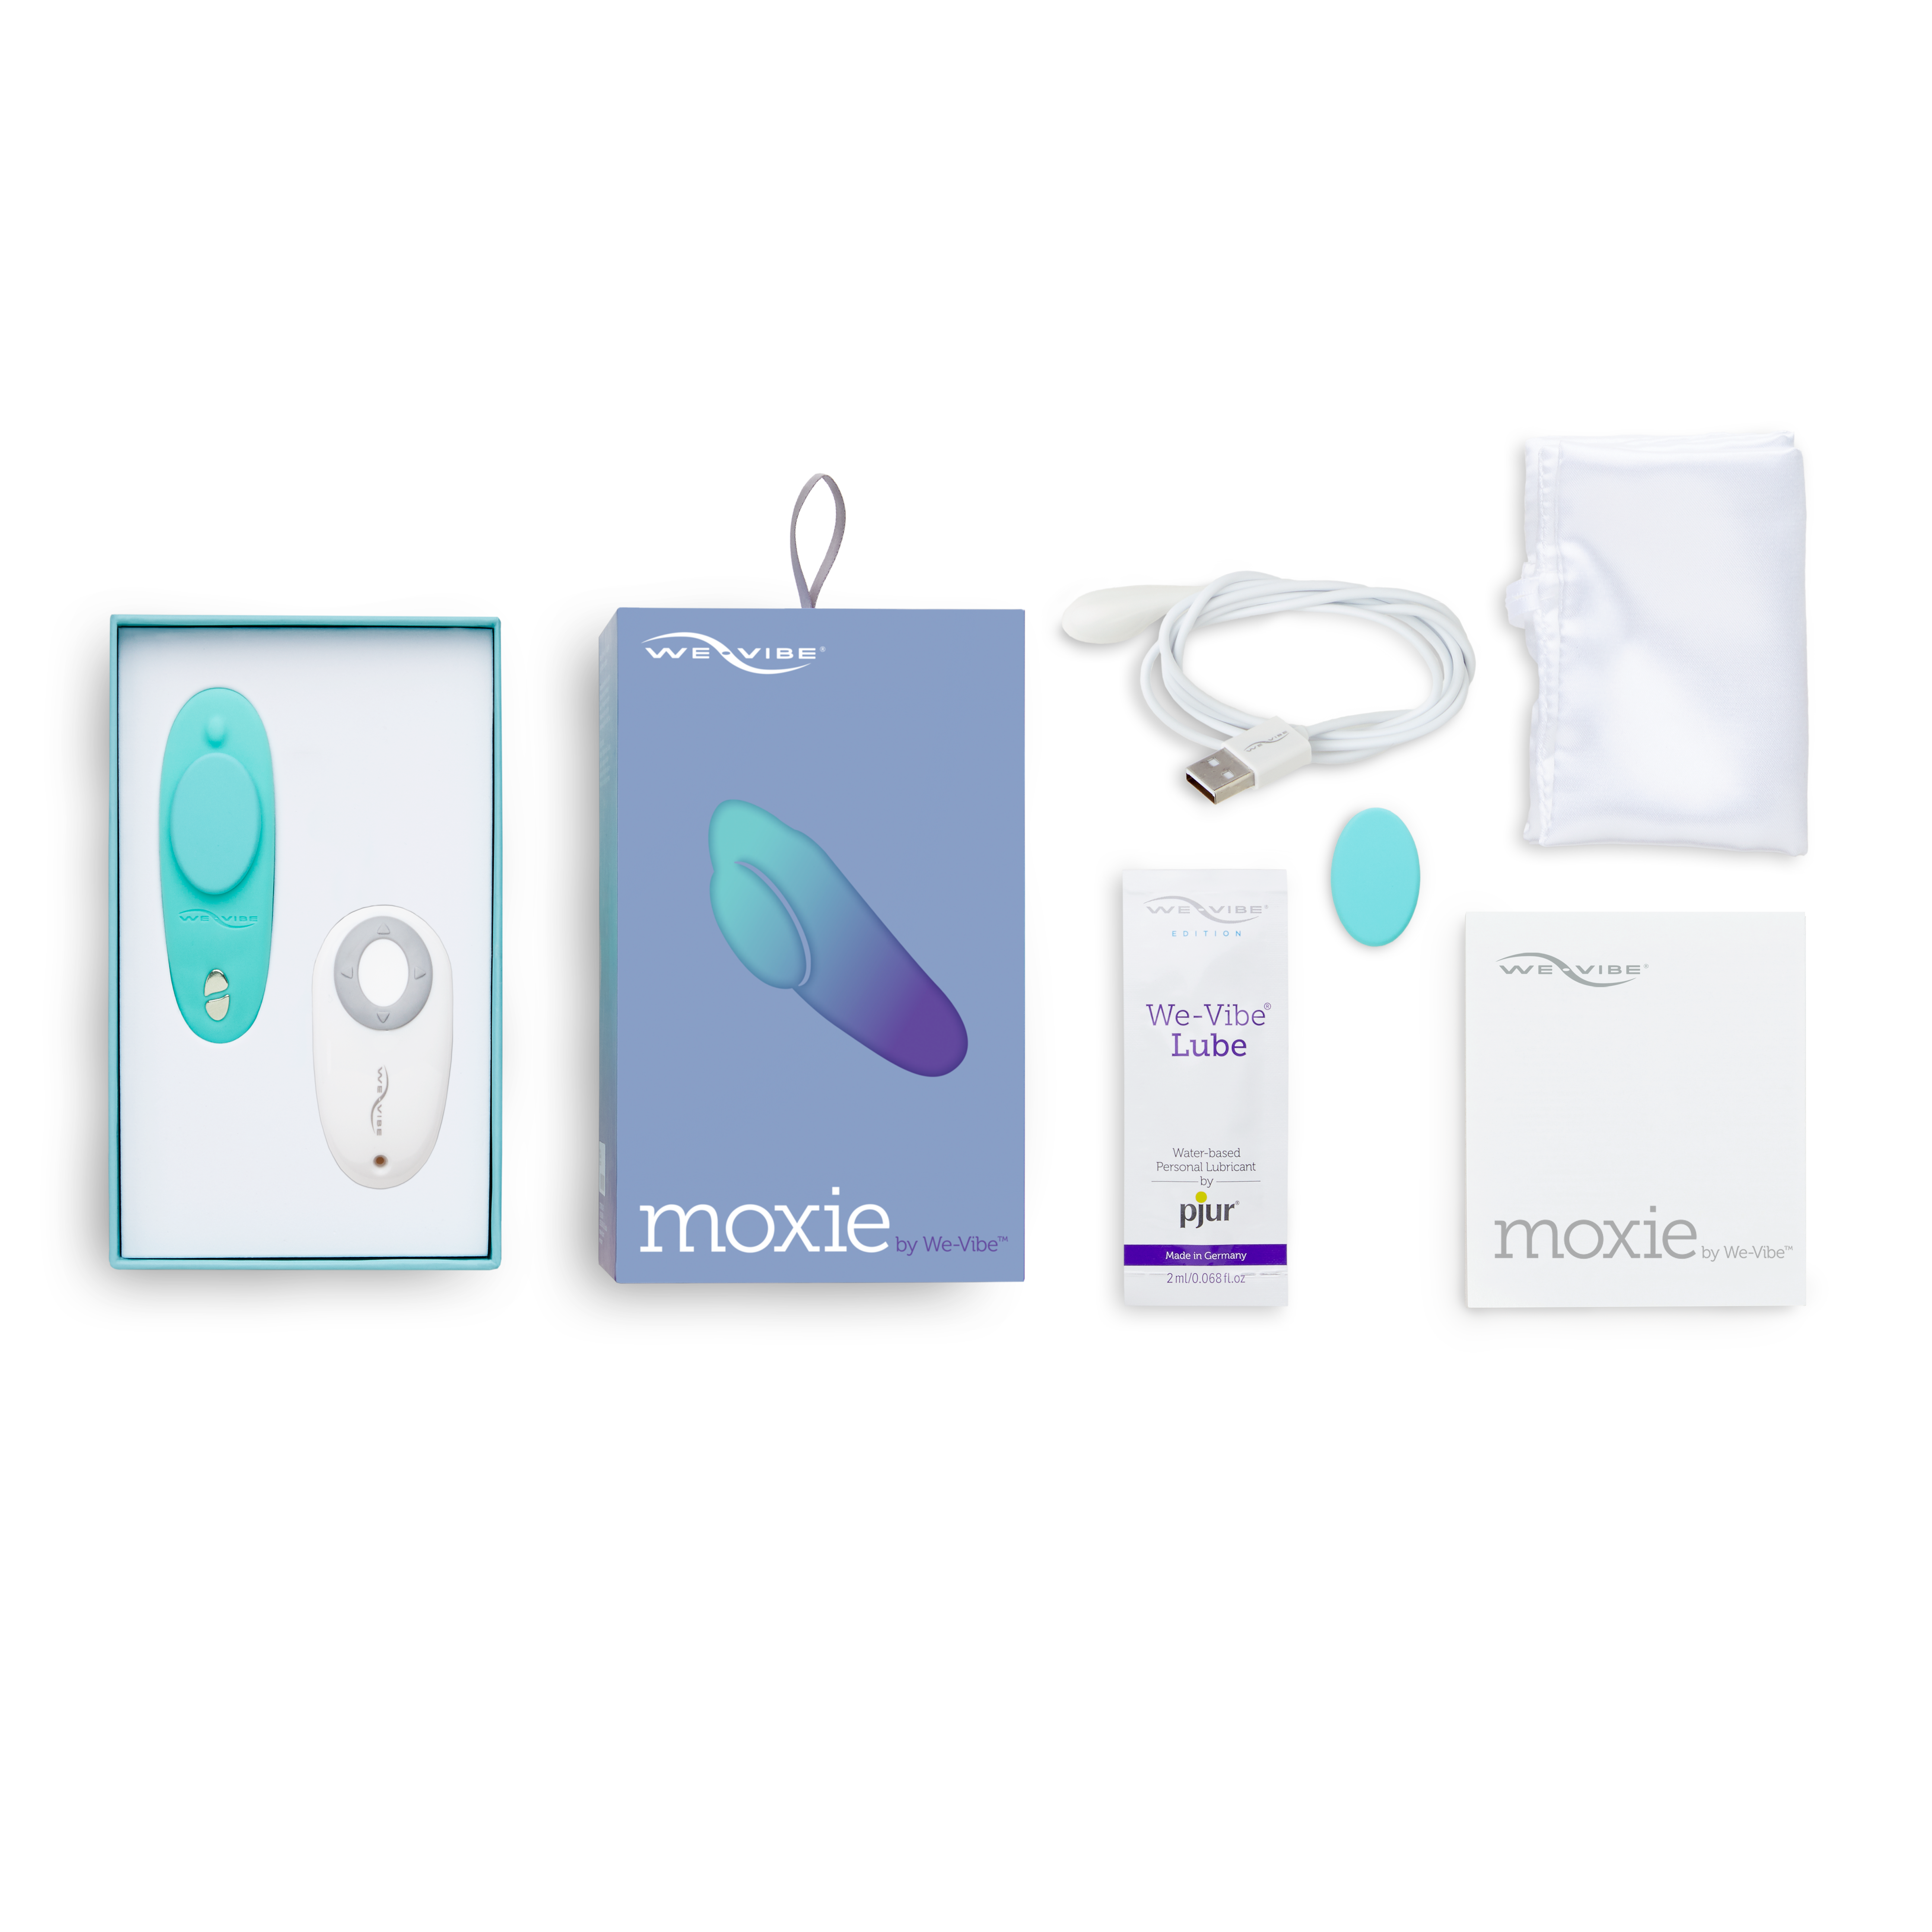 We-Vibe Moxie with all its box contents laid out